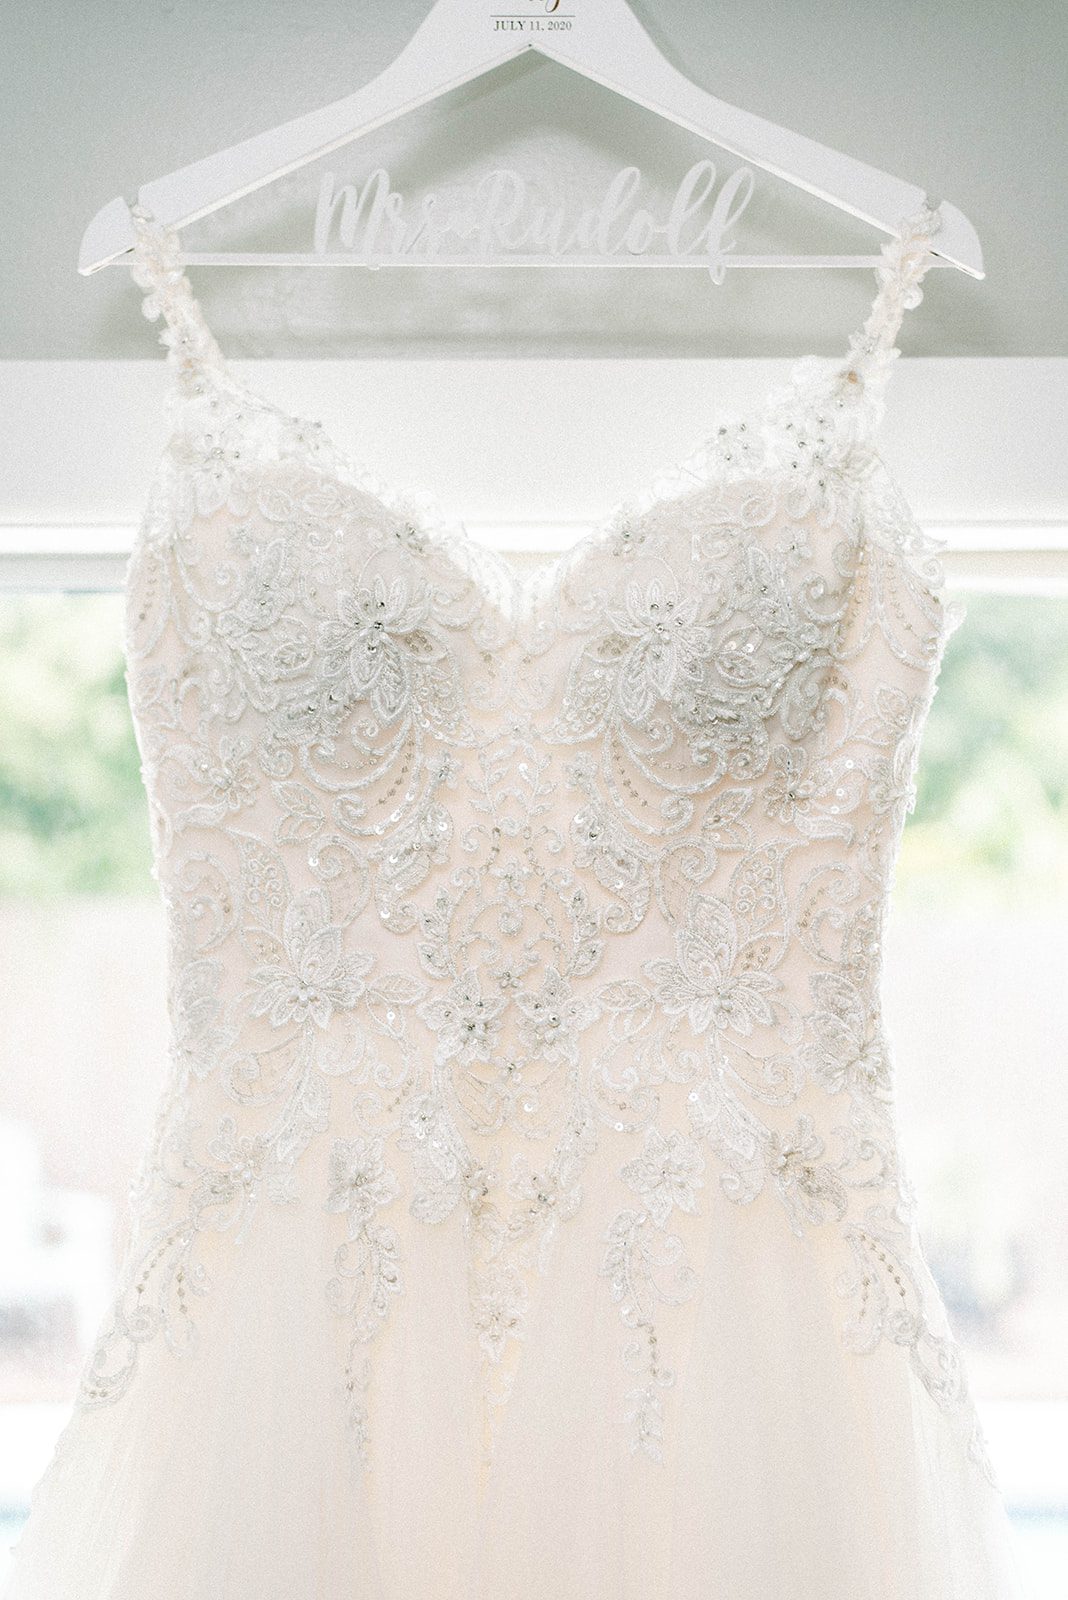 gorgeous perfect wedding dress hanging on a hanger for a bride on her wedding day